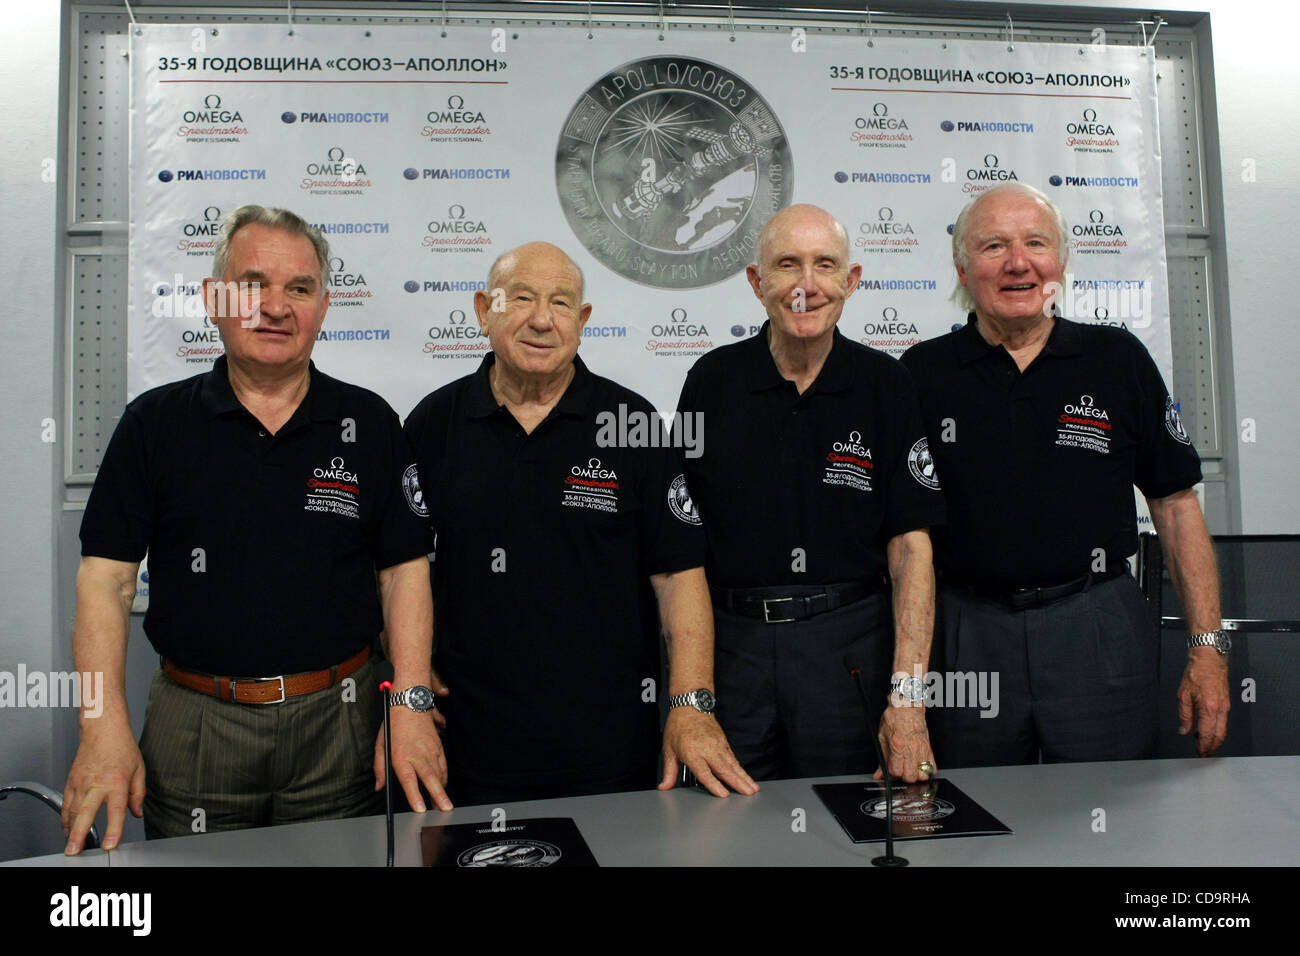 35th anniversary of Apollo-Soyuz Test Project was celebrated in Moscow. Pictured: l-r cosmonauts Valery Kubasov and Alexei Leonov and U.S. astronauts Thomas Stafford and Vance Brand at the press conference in Moscow. On July 15, 1975, the Soyuz-19 spacecraft with cosmonauts Alexei Leonov and Valery  Stock Photo